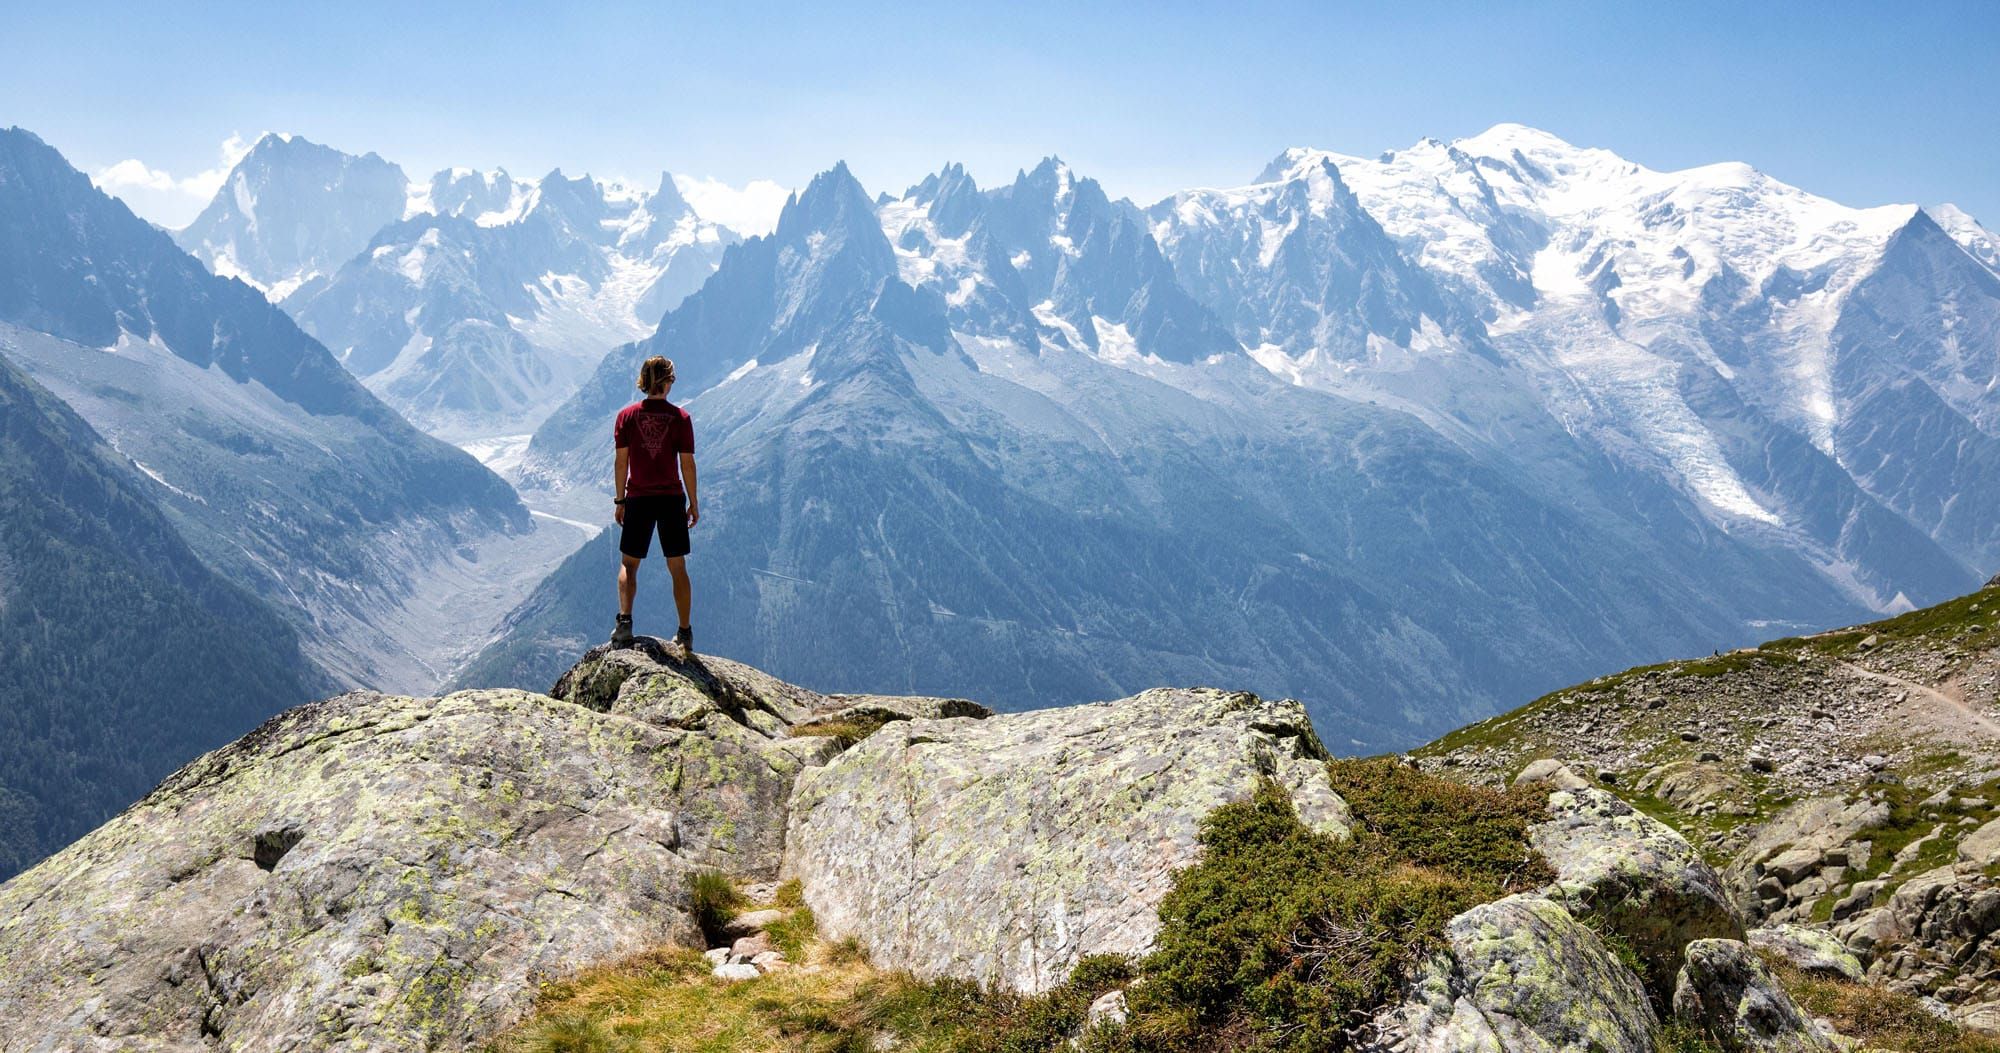 Featured image for “20 Best Things to Do in Chamonix, France in the Summer”